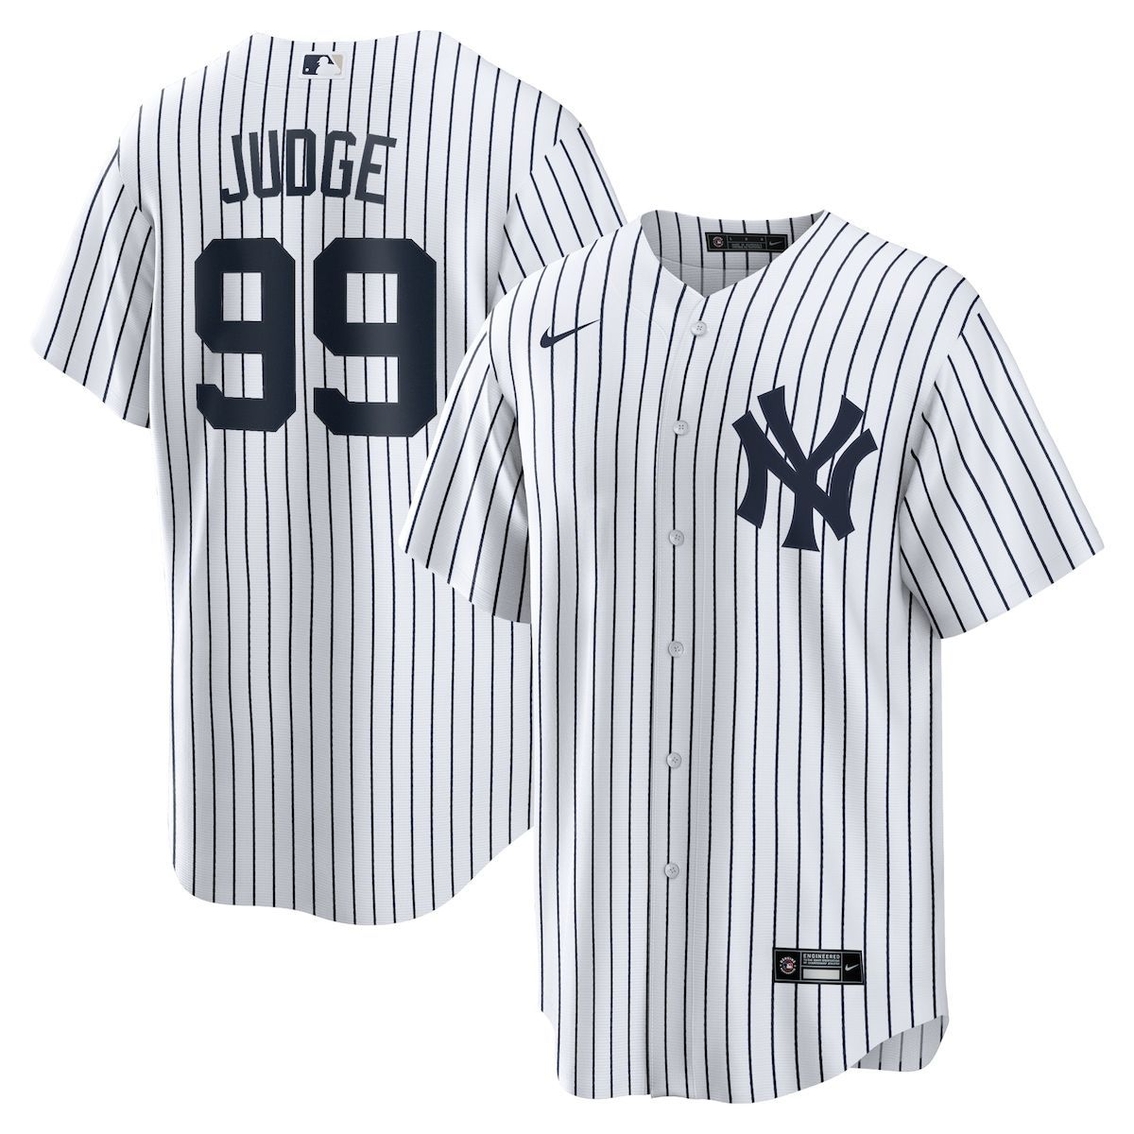 Nike Men's Aaron Judge White New York Yankees Home Replica Player Name Jersey - Image 2 of 4